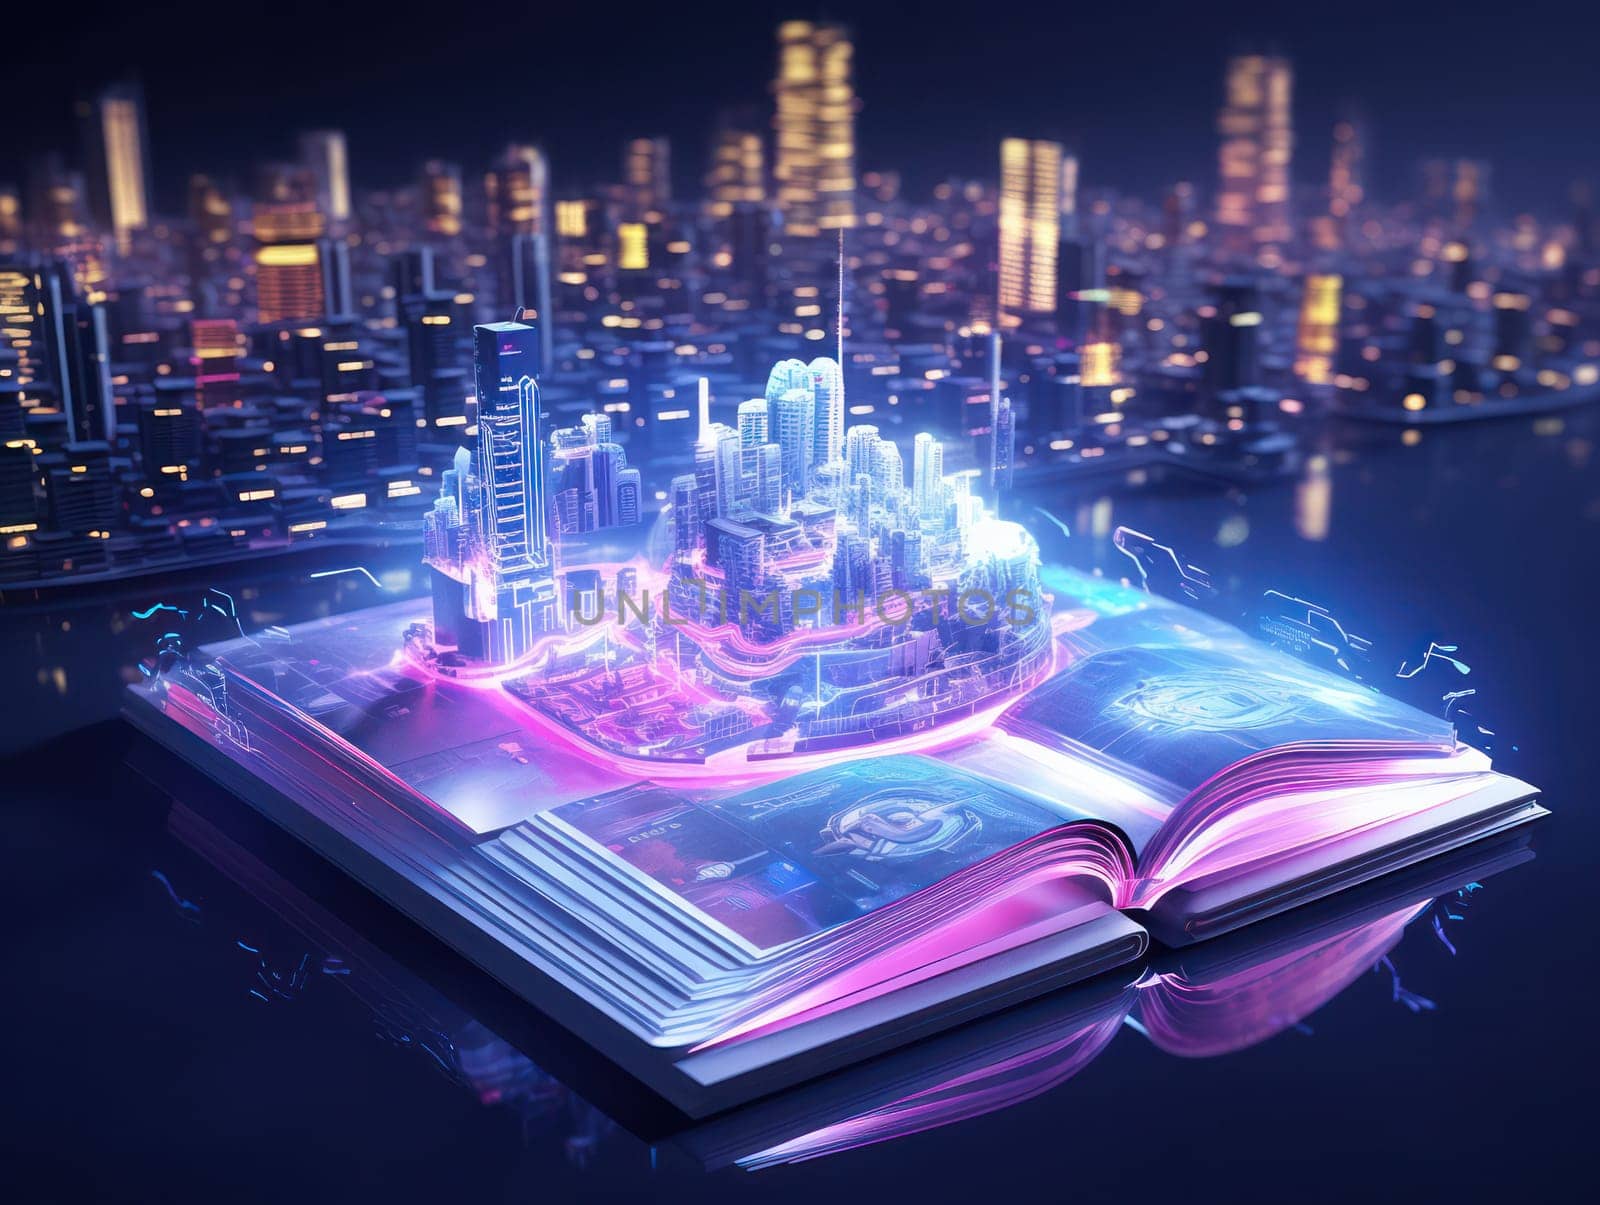 Connected City: A Futuristic Network of Smart Skyscrapers Illuminated with Neon Lights in the Vibrant Cityscape